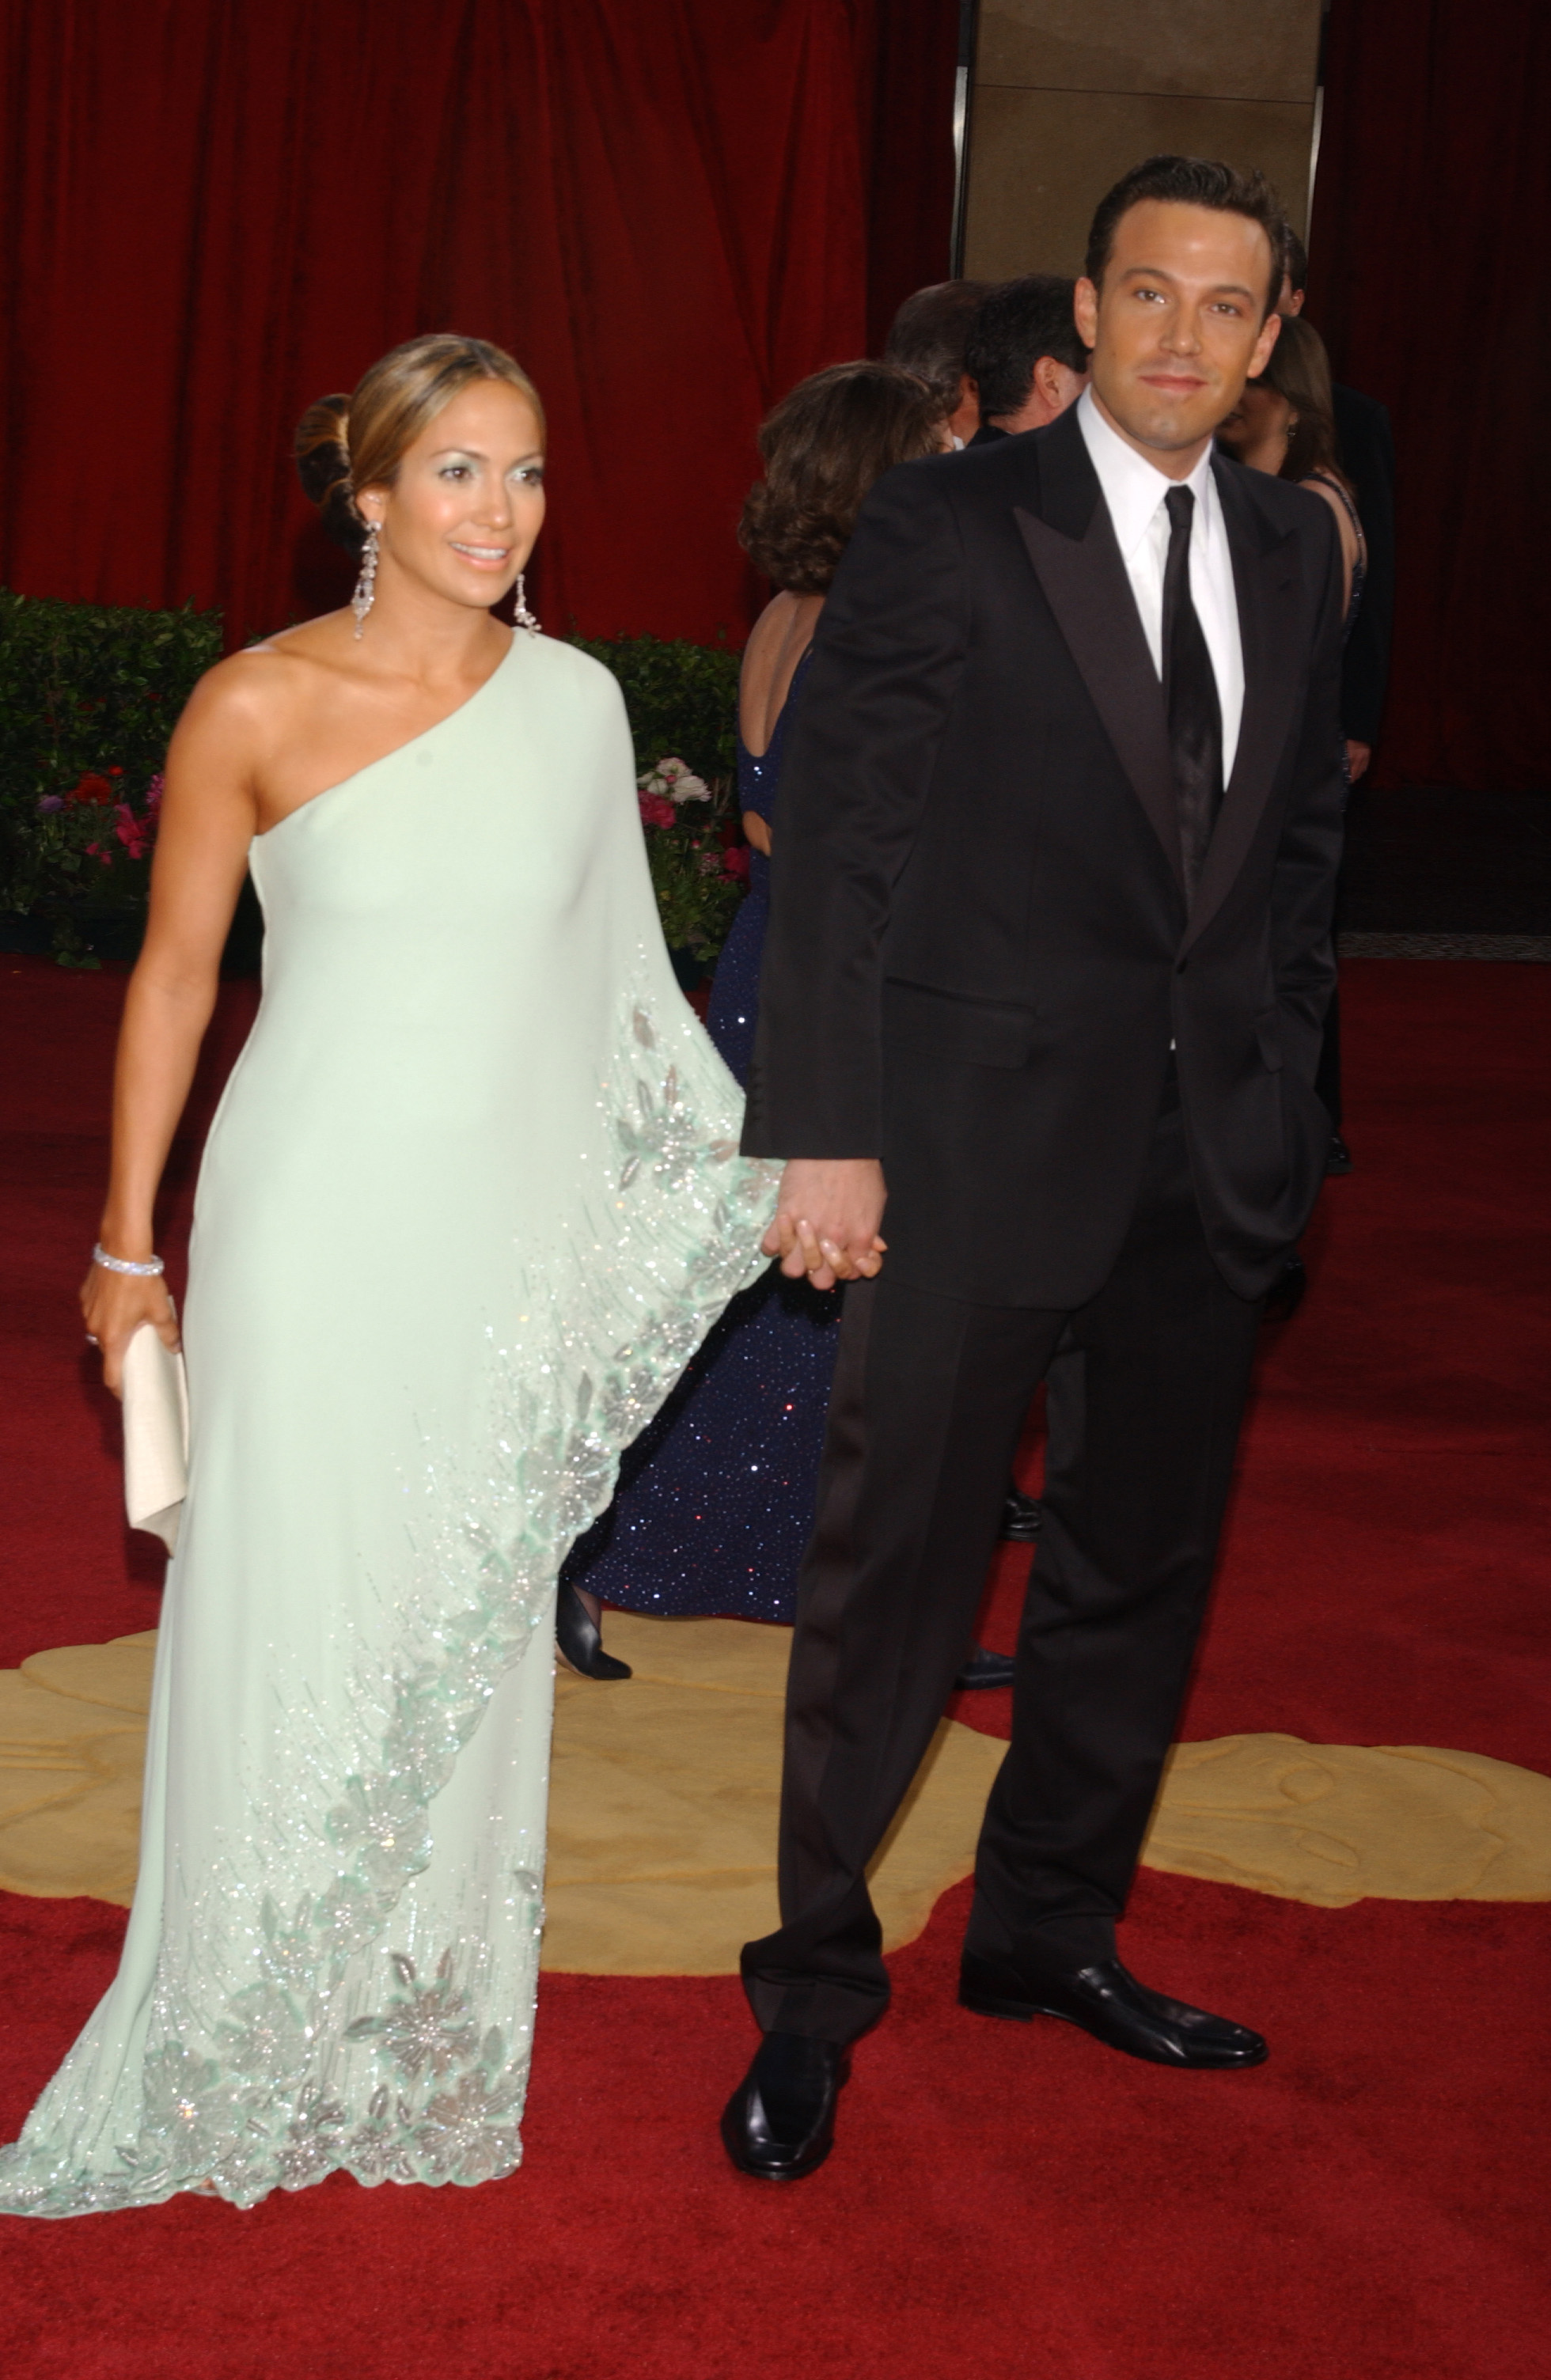 Jennifer Lopez and Ben Affleck at the 75th Annual Academy Awards in 2003. | Source: Getty Images